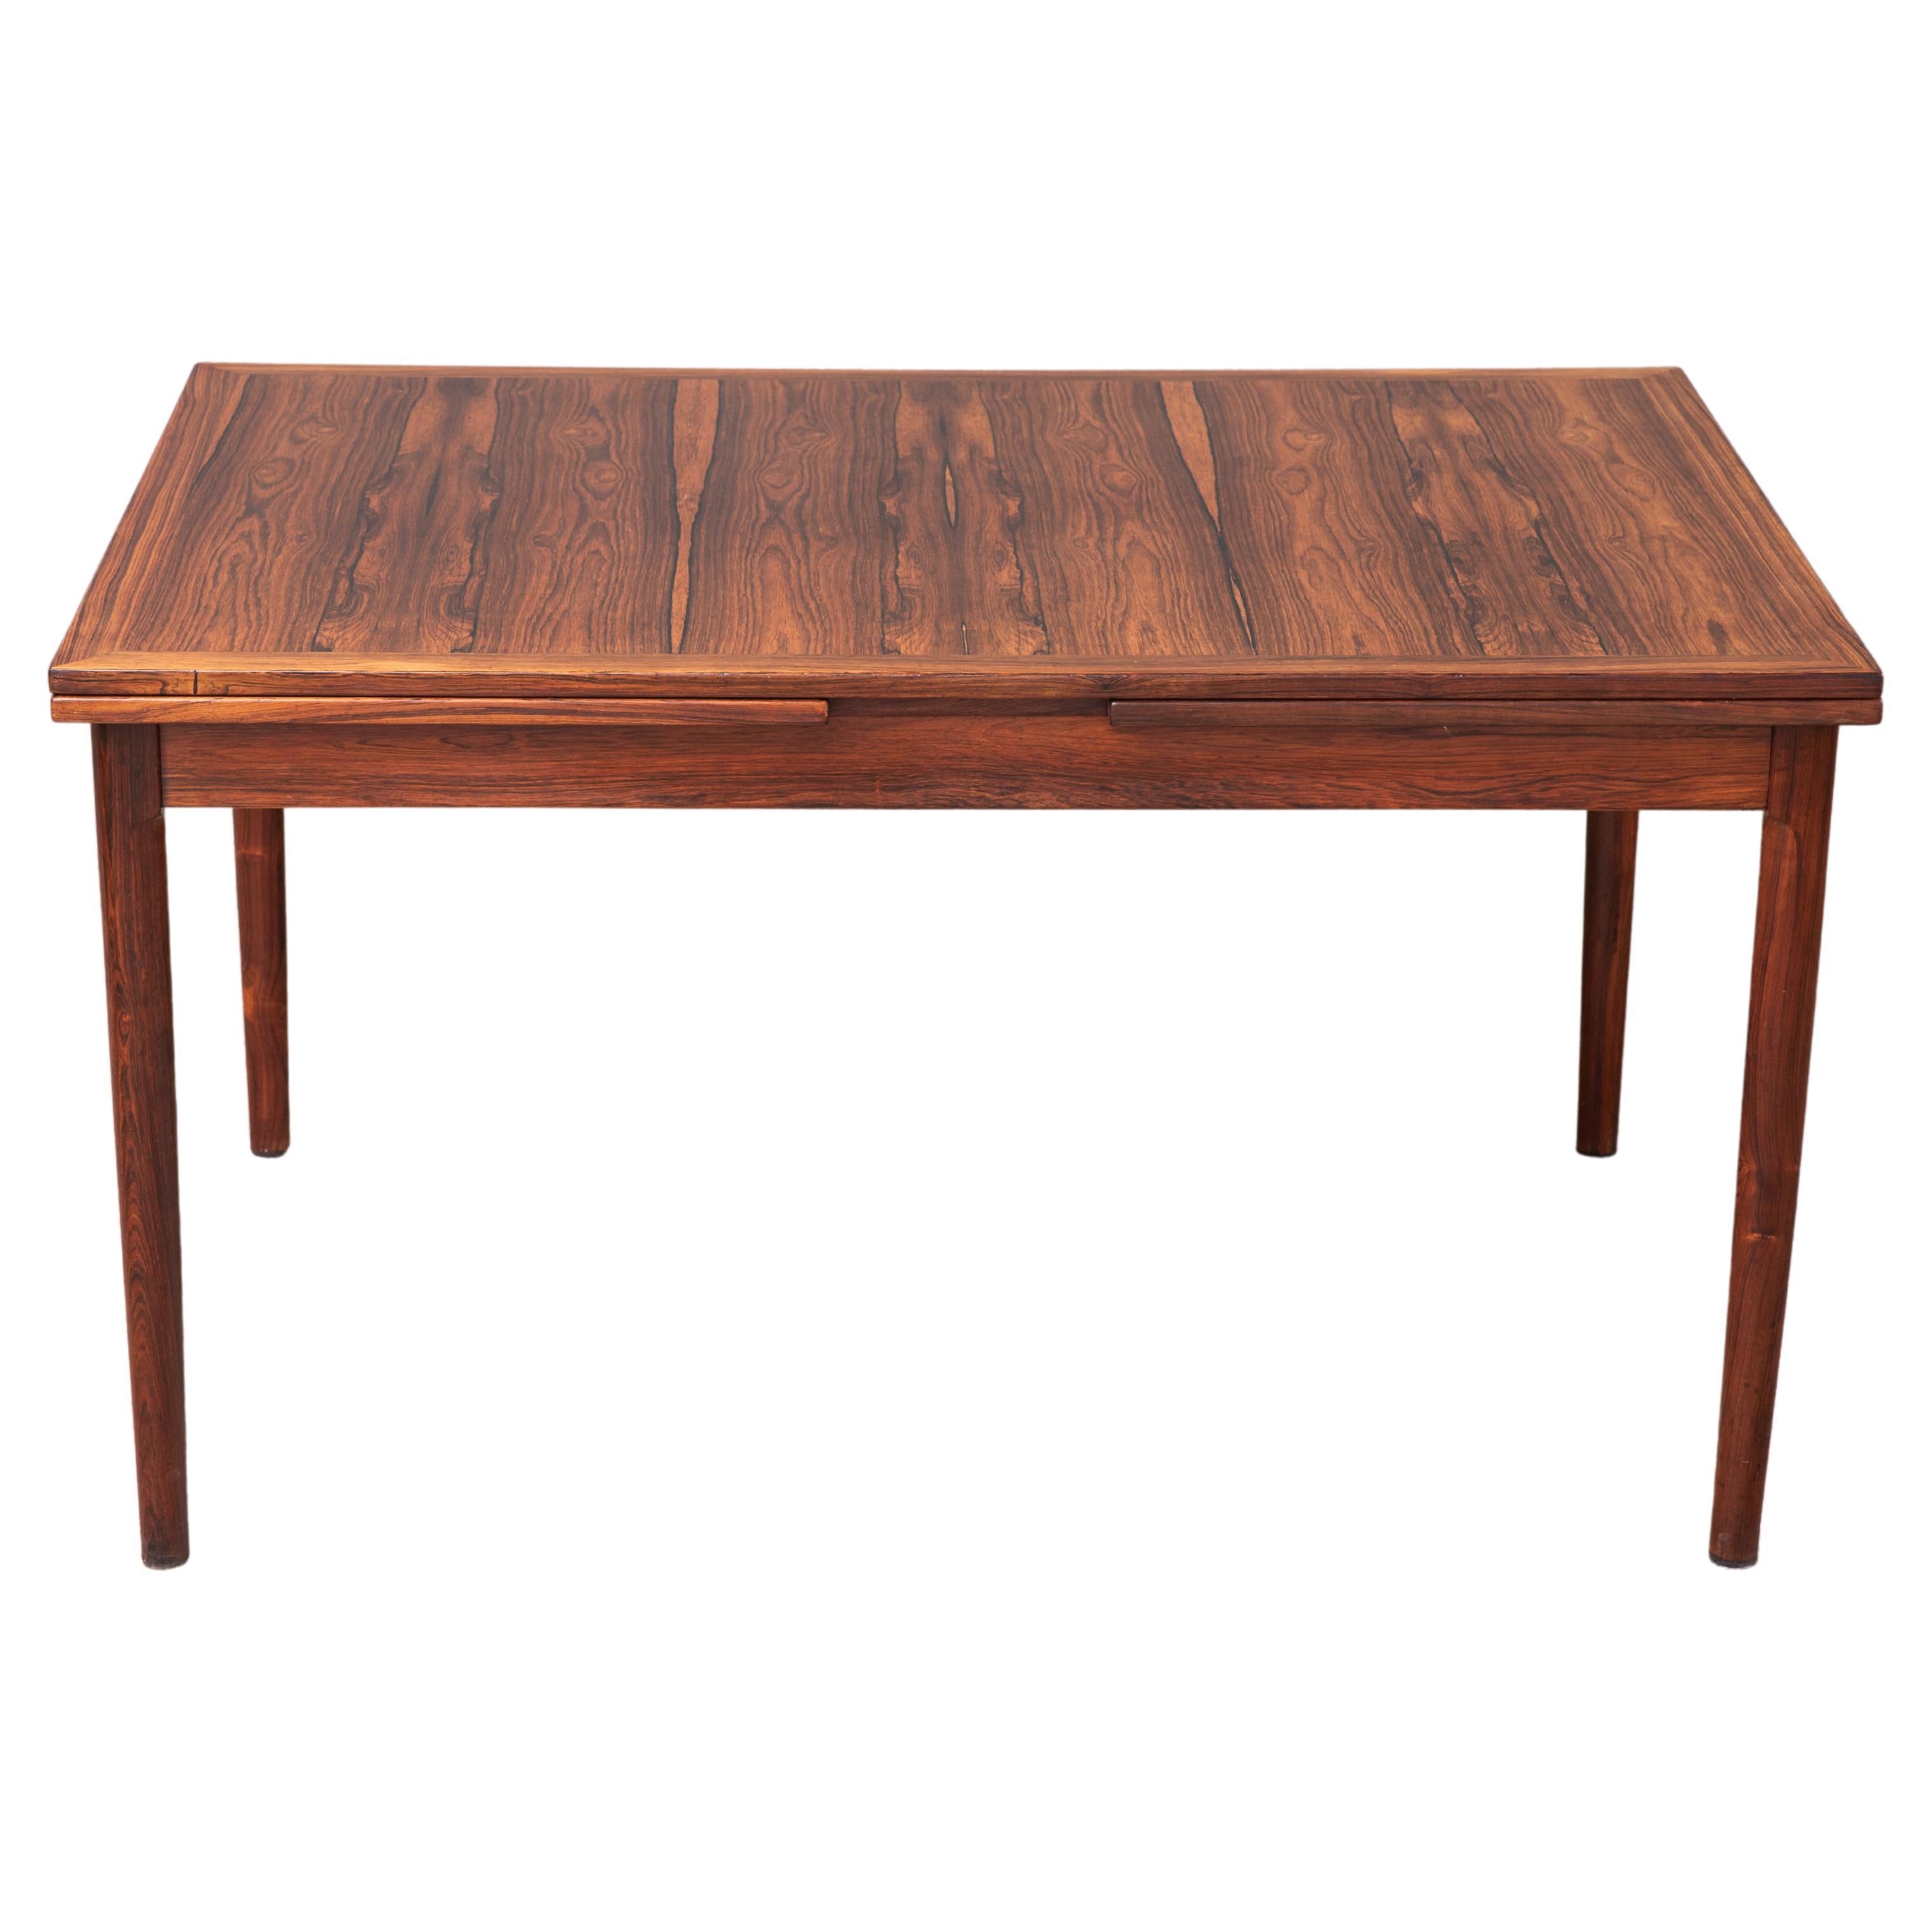 Danish Midcentury Danish Rosewood Dining Table with Extensions, 1960s